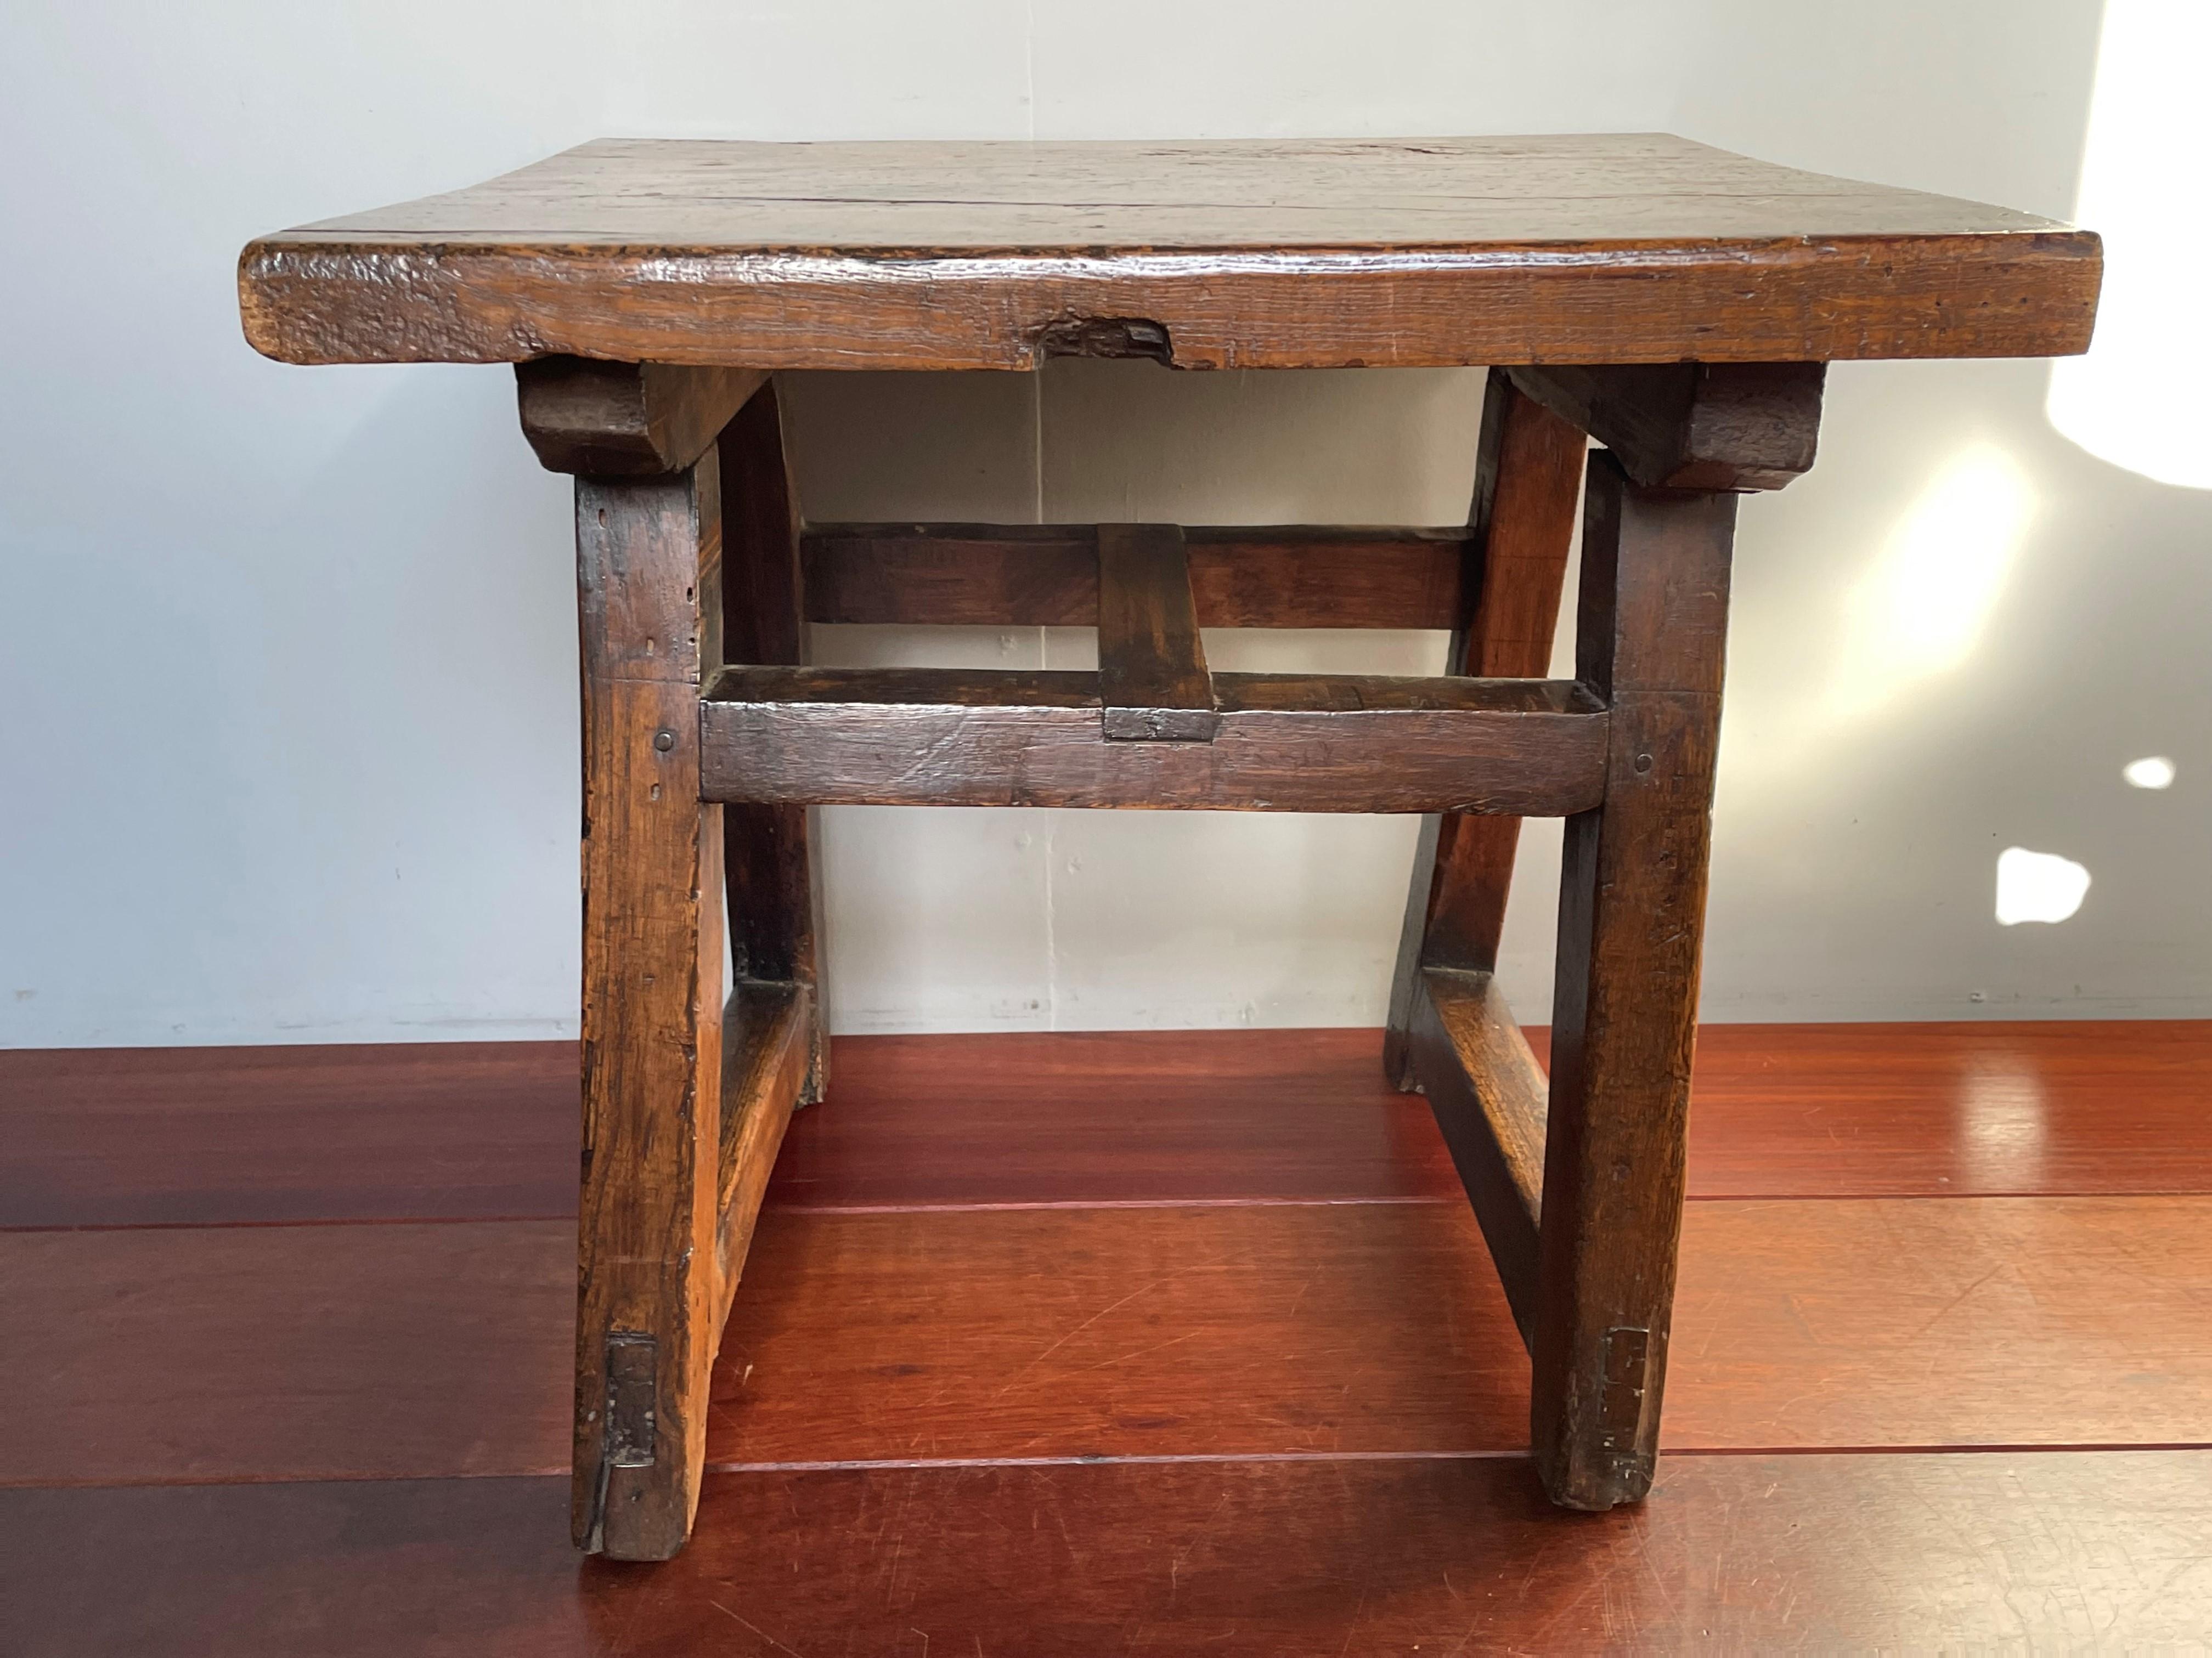 Antique & Rustic Early 1800s Wooden Spanish Countryside Pay Table with Drawer For Sale 2